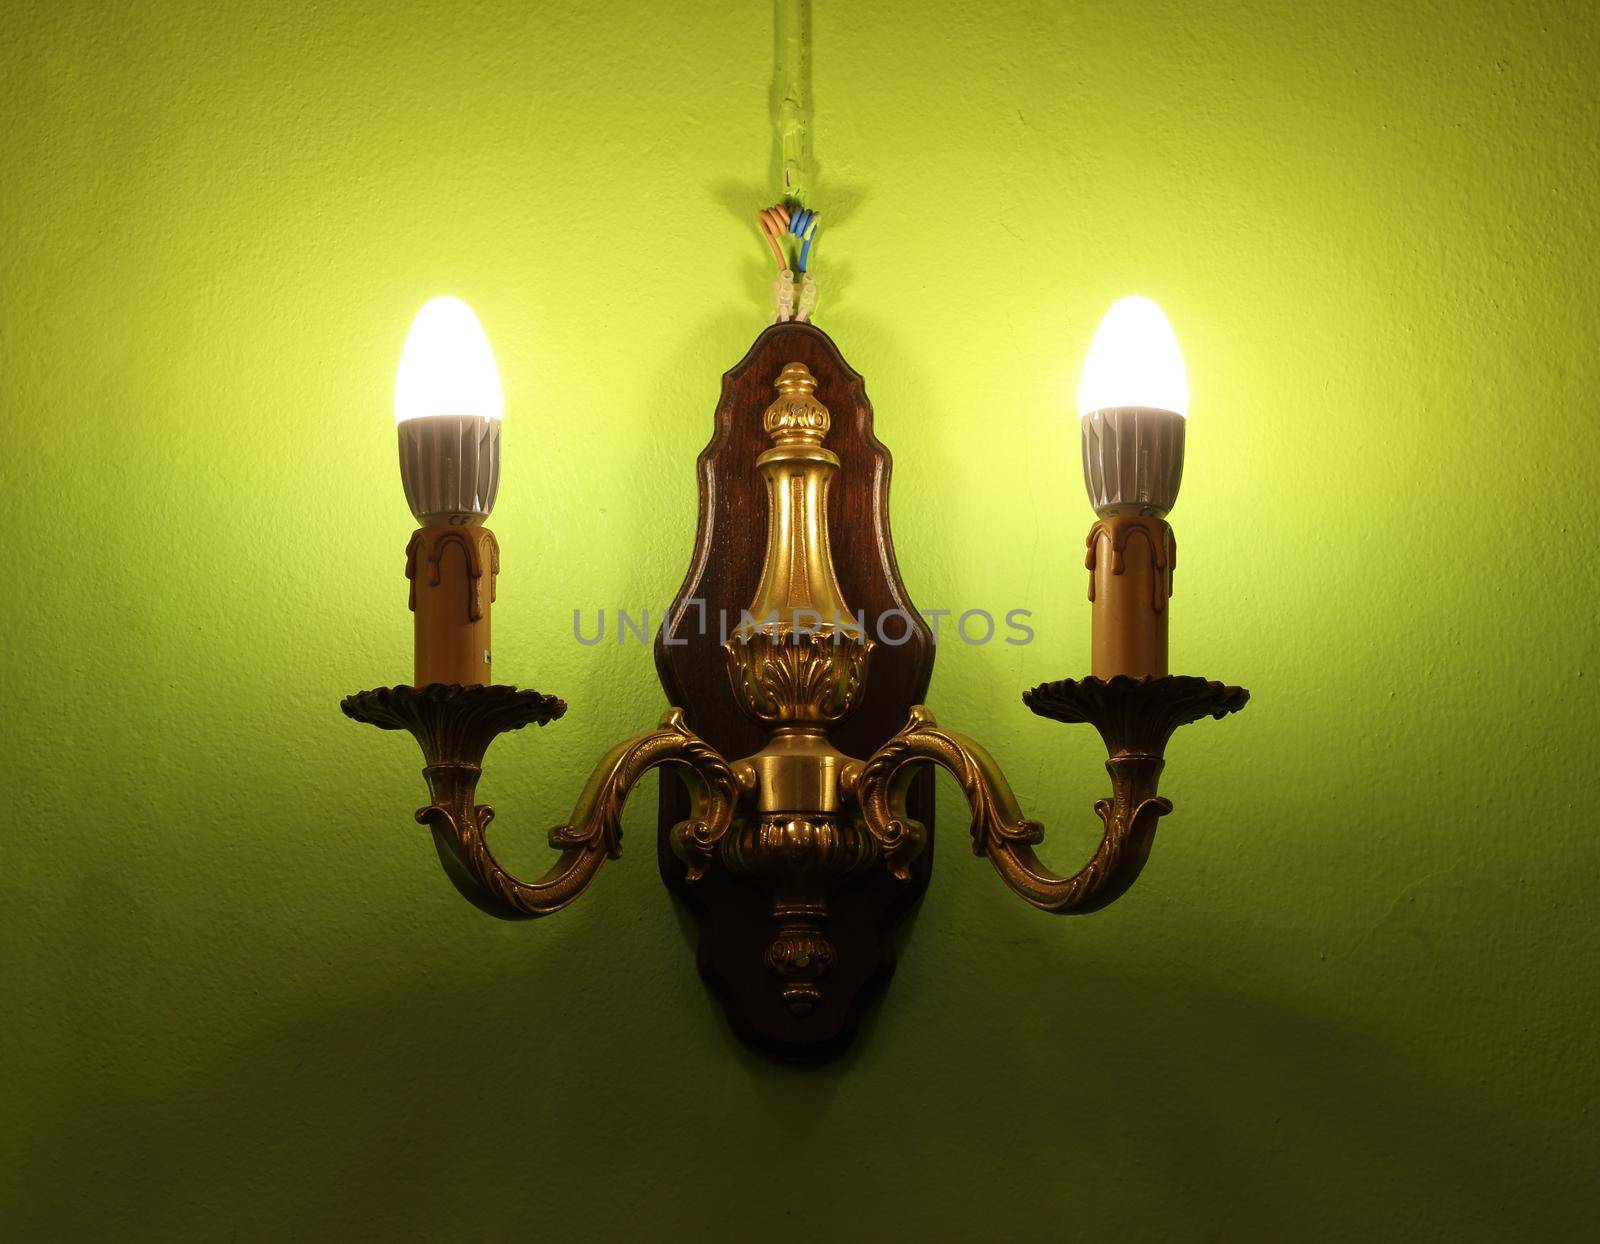 Lighted classic lamp on the wall by geargodz